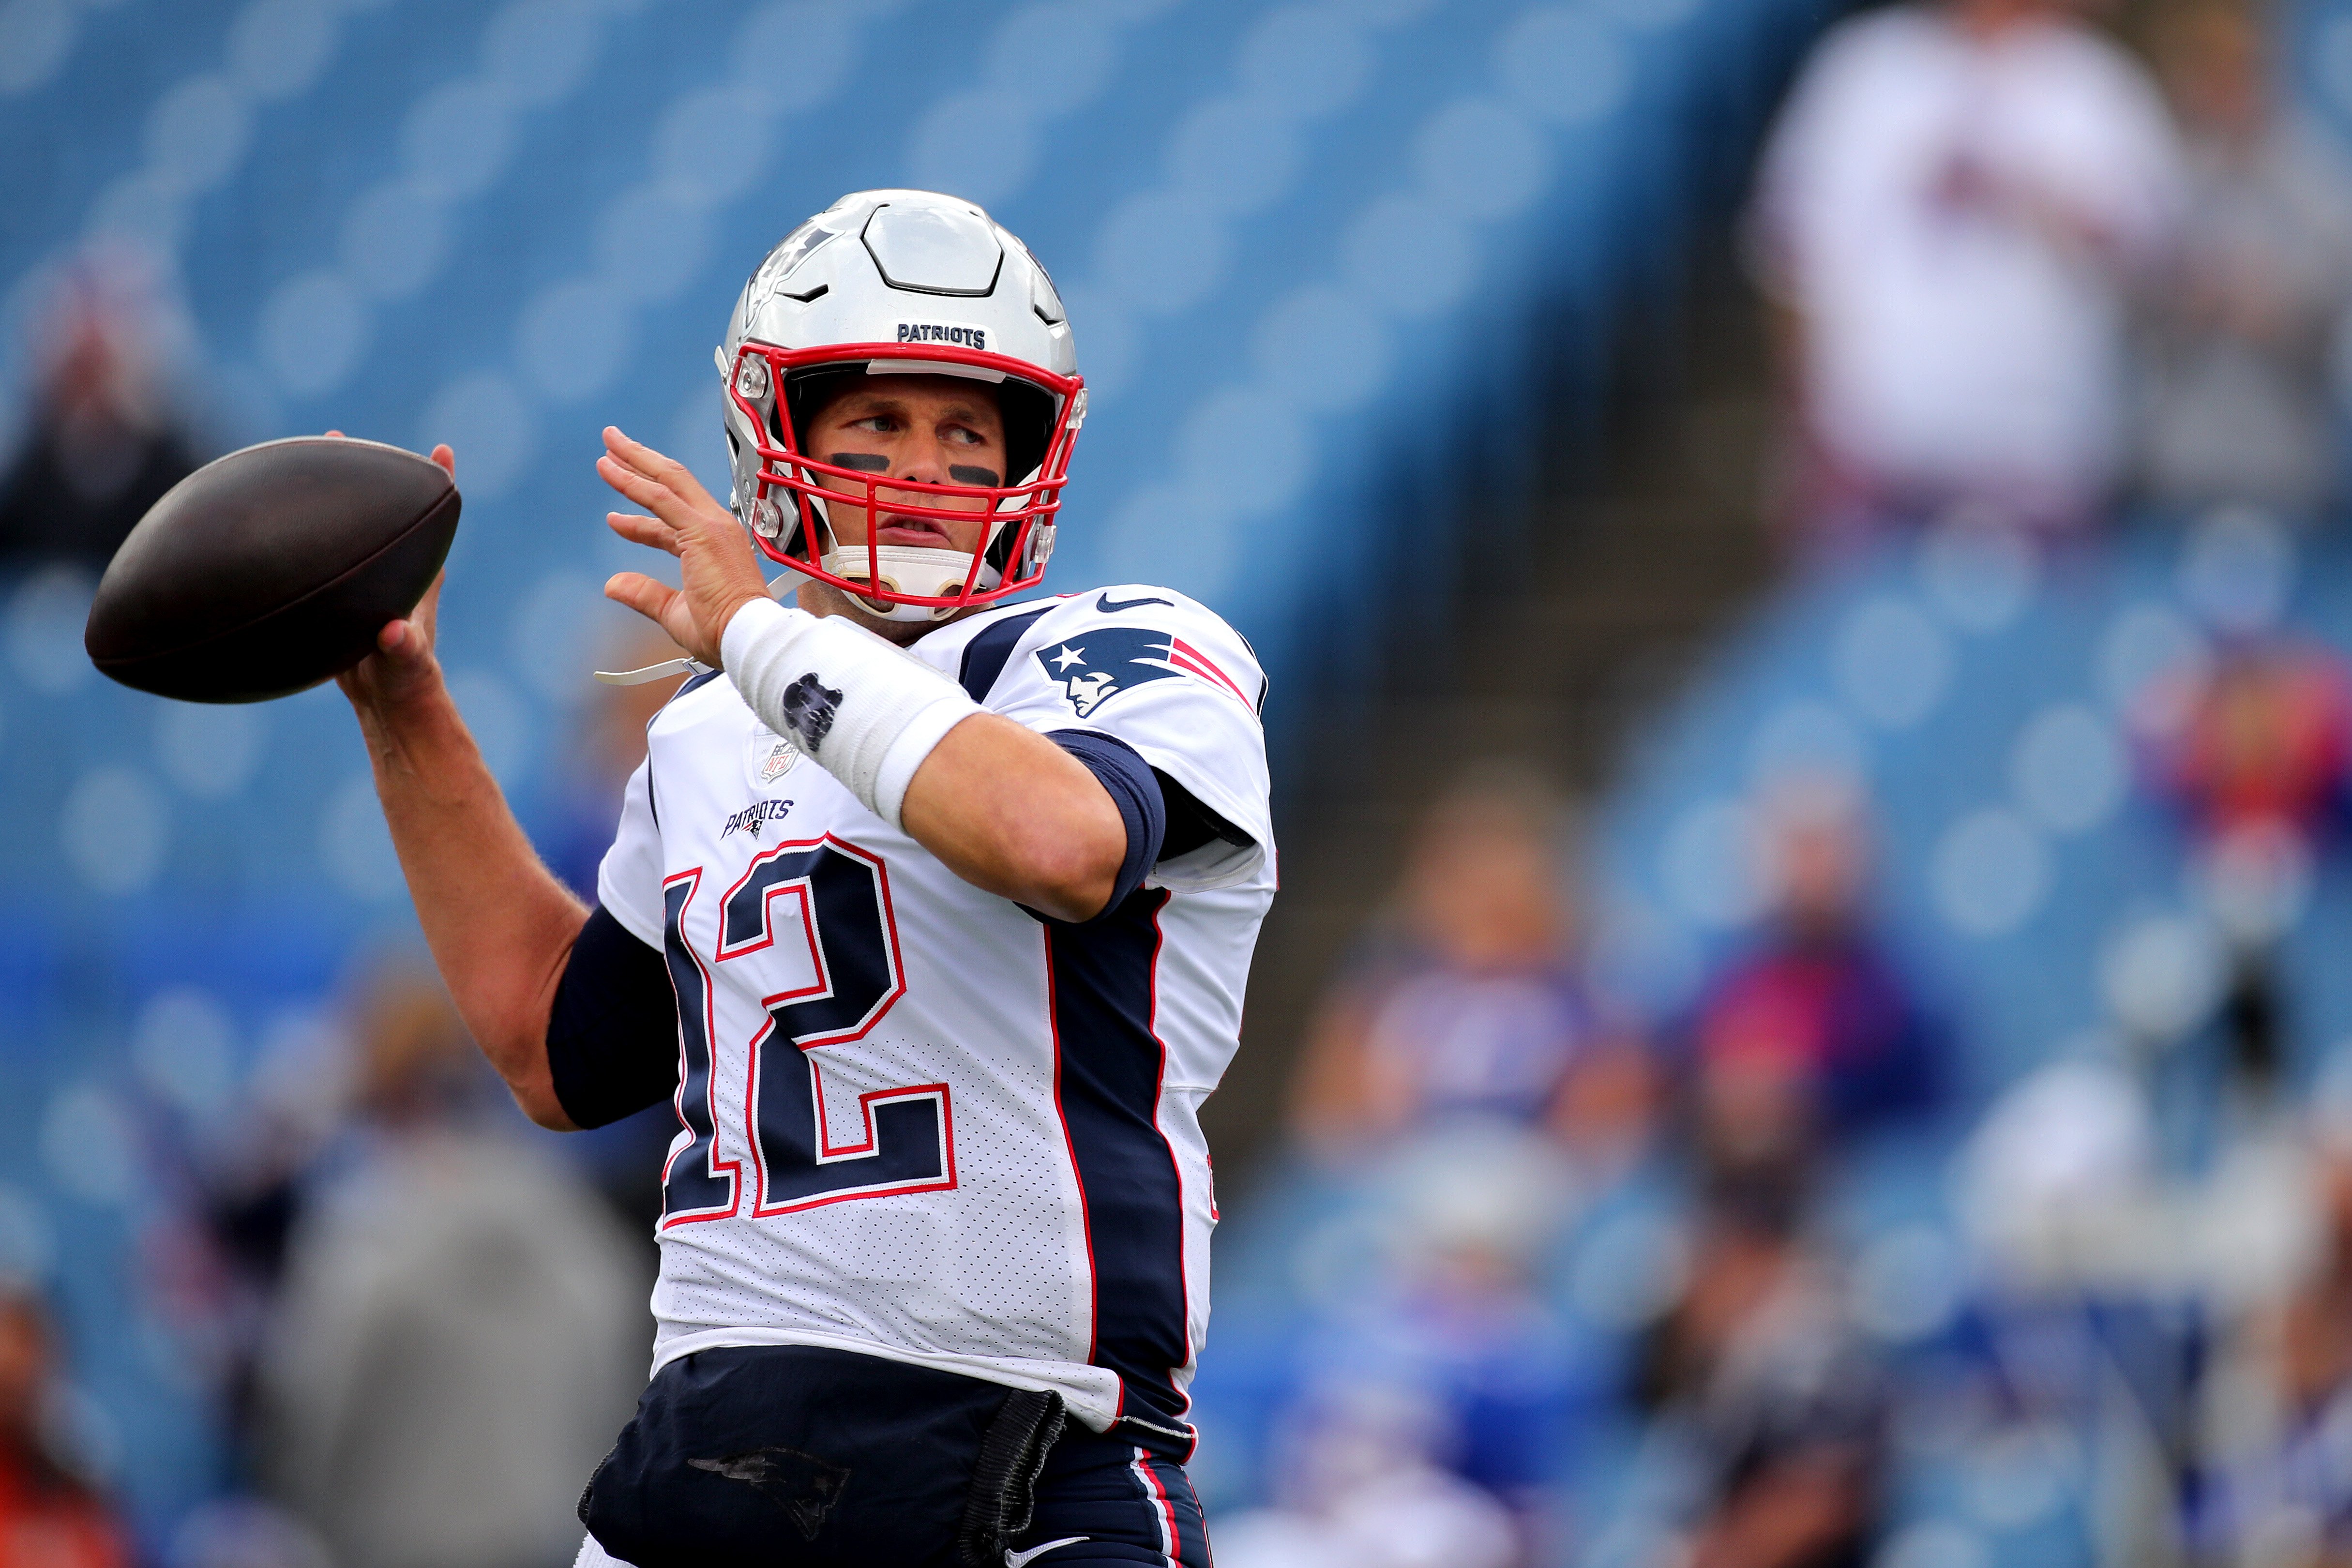 Tom Brady pictured warming up prior to the game against the Buffalo Bills in 2019. | Photo: Getty Images